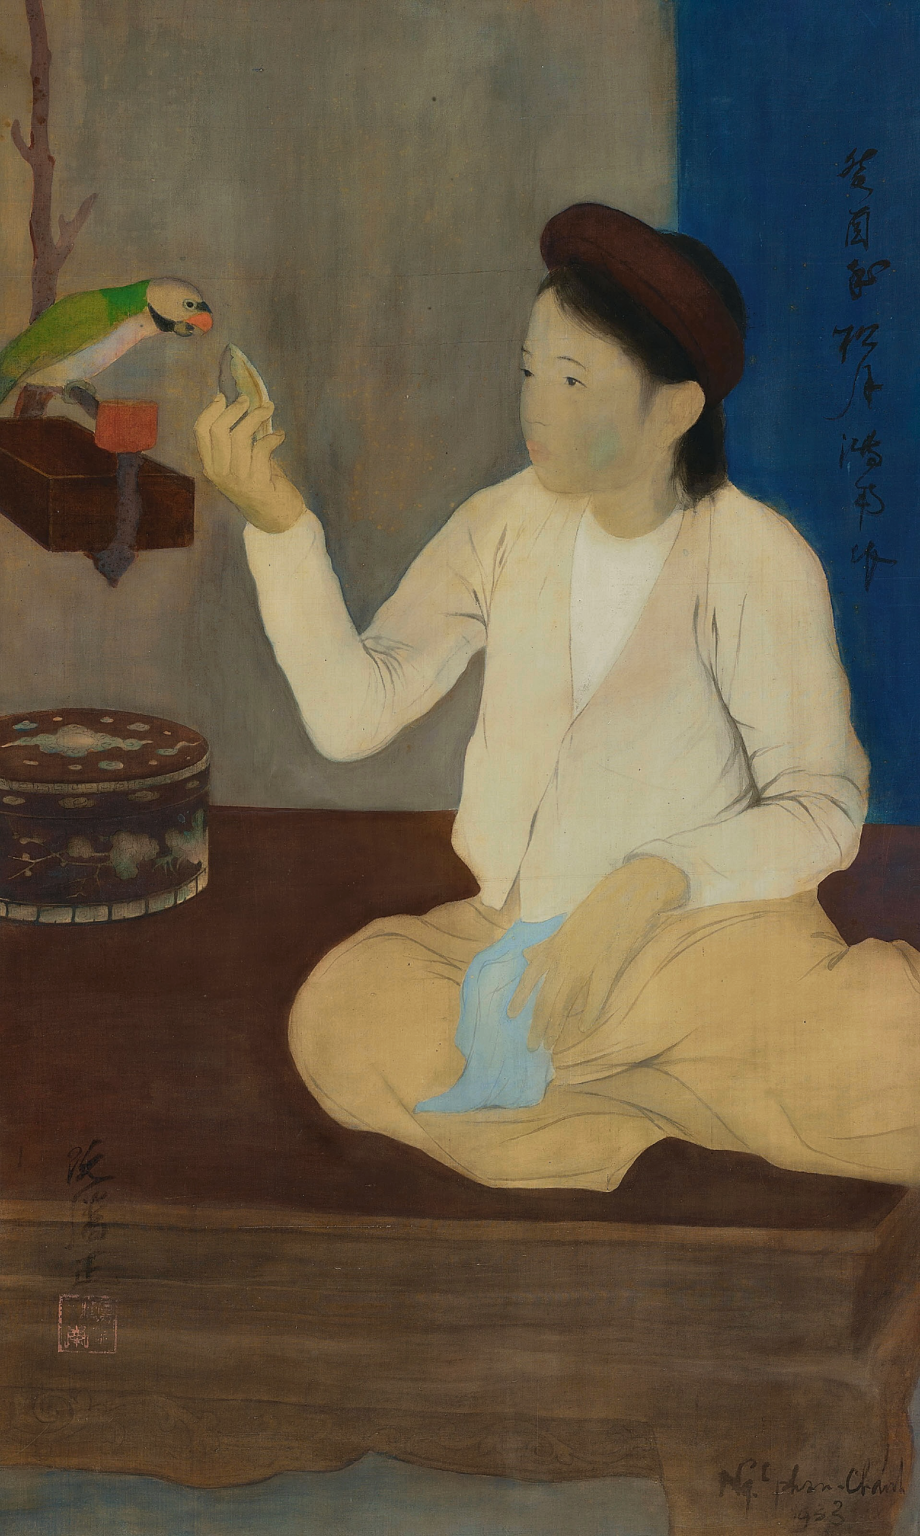 NGUYEN PHAN CHANH (VIETNAM, 1892-1984)
Jeune fille au Perroquet (Young Girl with Parrot)
inscribed in Chinese (upper right); signed and dated 'Ng phan-Chanh 1933' (lower right); signed again in Chinese (lower left)
ink and gouache on silk in the original Gadin frame
82 x 49 cm. (32 1/4 x 19 1/4 in.)
Painted in 1933
one seal of the artist

By 1933, Nguyen Phan Chanh was already known to a wide audience: through his school in Vietnam, the Hanoi School of Fine Arts, which often organized exhibitions since 1929, and internationally, from 1931 onward, when l’Illustration, a famous publication at the time, wrote an illustrated article on the Paris Colonial Exhibition. Following this major event, the AGINDO (Indochina Economic Board) in Paris was in charge of exhibiting and promoting works by the best students of the Hanoi School of Fine Arts including Phan Chanh’s. As a result, many high quality works were sent to France and acquired by prestigious French art collectors.

However, and it is a known fact, the role of a collector is essential in building the success of any artistic endeavour. One can become an artistic mentor as demonstrated by our painting presented here: Indeed, a letter dated 24 October 1933, from Blanchard de la Brosse (Director of AGINDO) addressed to Victor Tardieu (Director of Hanoi School of Fine Arts) describes the French collectors’ tendencies and taste. When the French Minister at the time, Mr. Balinier, expressed his preference for a piece by Nam Son over the Devin by Nguyen Phan Chanh, Blanchard de la Brosse wrote in regret: “This incident confirms that the French art amateur has a strong leaning towards colour. No matter how evocative of Tonkin Phan Chanh’s works can be, and despite its remarkable quality, one can only come to the conclusion that they just don’t appeal to the public. It is desirable for this excellent artist to cultivate a palette of brighter colours (…)” 

These few lines summarize the general feeling about Phan Chanh’s work and even some of the ‘new’ collectors would reproach the sombre ochre and muggy aspect of his work. One can expect that Tardieu would share these remarks with the artist which could explain the genesis of La jeune fille au perroquet. It is a truly extraordinary work where the artist moved away from his preferred classical monochrome set in a camaieu of brown for a more colourful chromatic range. On the other hand, he remained deeply faithful to his very own compositions, unusual and original, based on a clever use of geometry achieved by the application of subtle tones. The painting reveals a great sweetness, a mix of humility and dignity so characteristic to the painter’s work.

The young girl is depicted seated in the centre of the work on a large wooden bed, defined by horizontal and vertical lines complemented by a great blue rectangle in the background’s upper right corner. Nguyen Phan Chanh would very often use this triangular construction and this is well demonstrated here with the use of black ink in the headdress, the bird’s tub and also the use of dark brown in the round dark box decorated with mother-of-pearl motifs. The girl’s arms feeding the bird with sapota fruit also creates two open triangles. Three touches of colour reinforce the triangle effect: the blue panel, the tissue held in the left hand and the other triangle created by the parrot itself, the sapota fruit and the cup. Only the roundness of the decorated box with mother-of-pearl motifs breaks the angular effect, a choice often made by the artist.

For a painter used to depicting mostly rural trades and scenes of the common people, this interior scene is rare. The furnishing and the bird’s food in this interior demonstrates a high social class in this very subtle work kept in a very good condition and still in its original Gadin’s frame.

Our La jeune fille au perroquet is truly a masterpiece by Nguyen Phan Chanh.

Jean-Francois Hubert
Senior Expert, Vietnamese Art